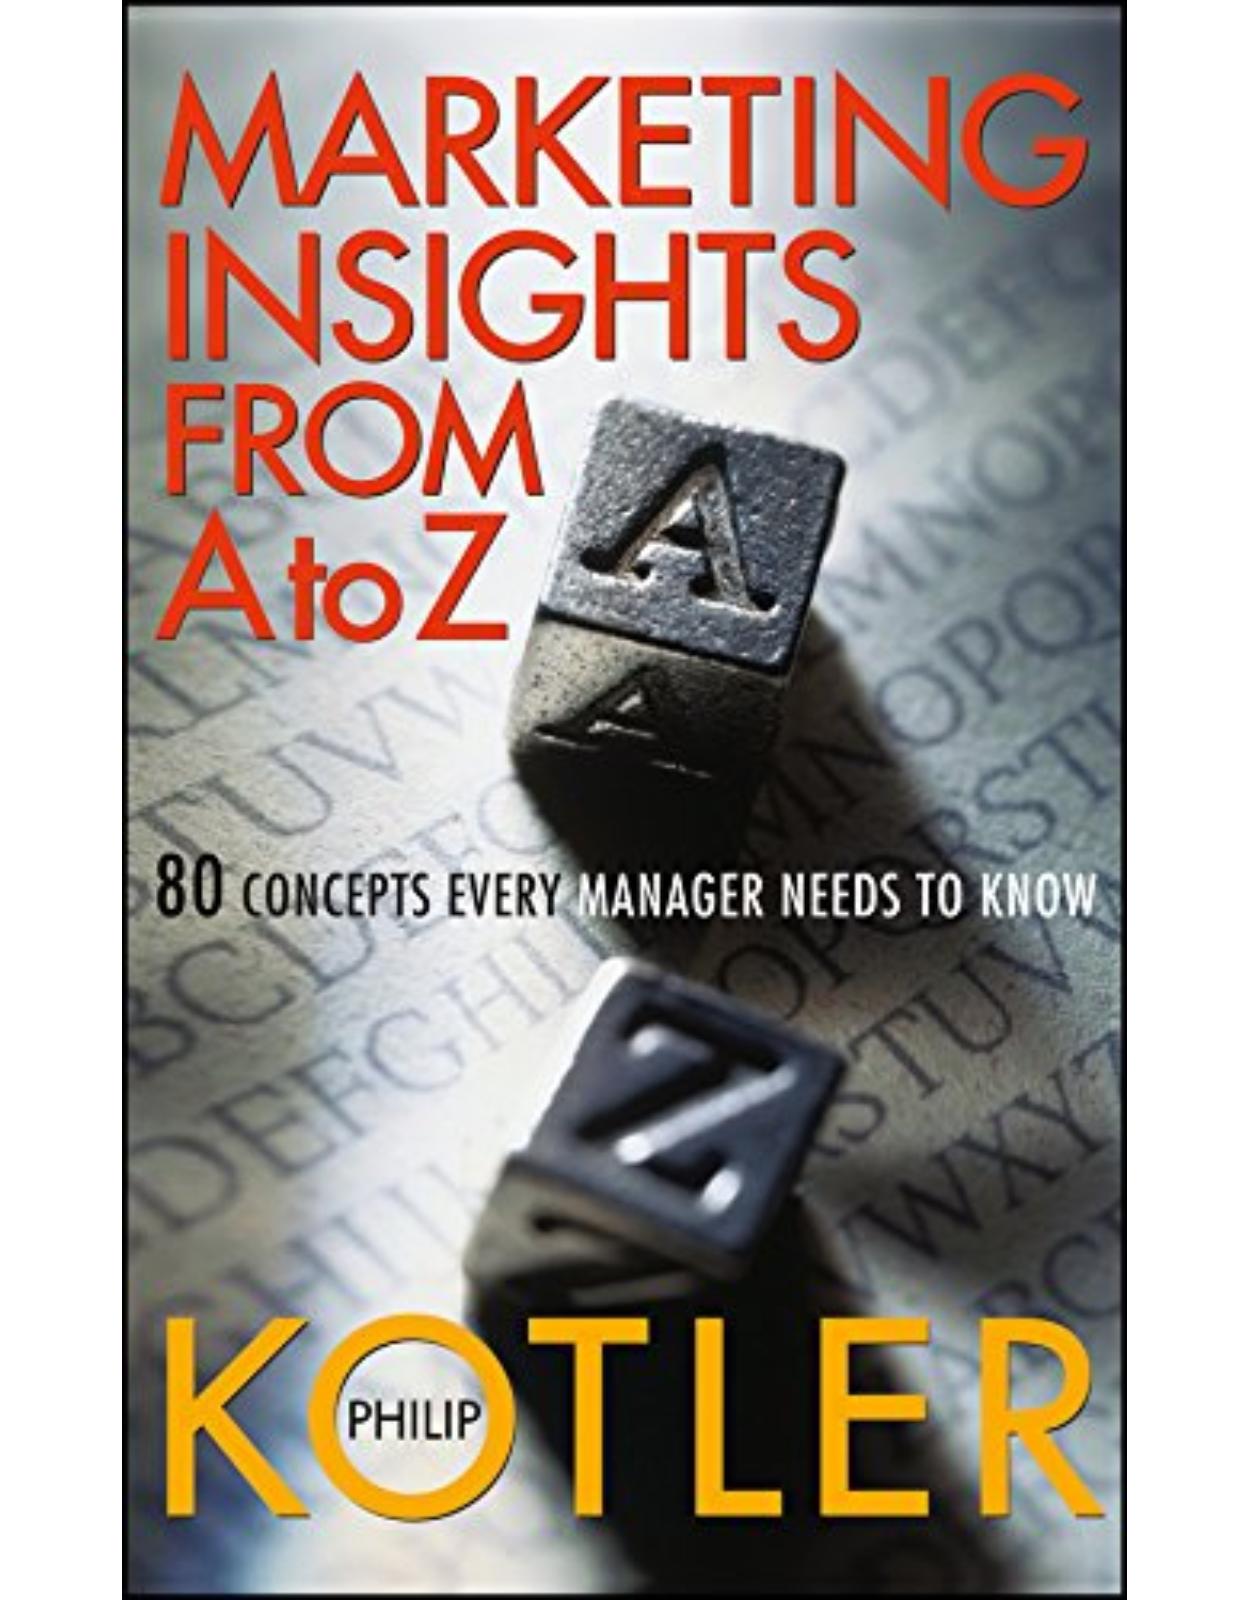 Marketing A to Z: 80 Concepts Every Manager Needs to Know